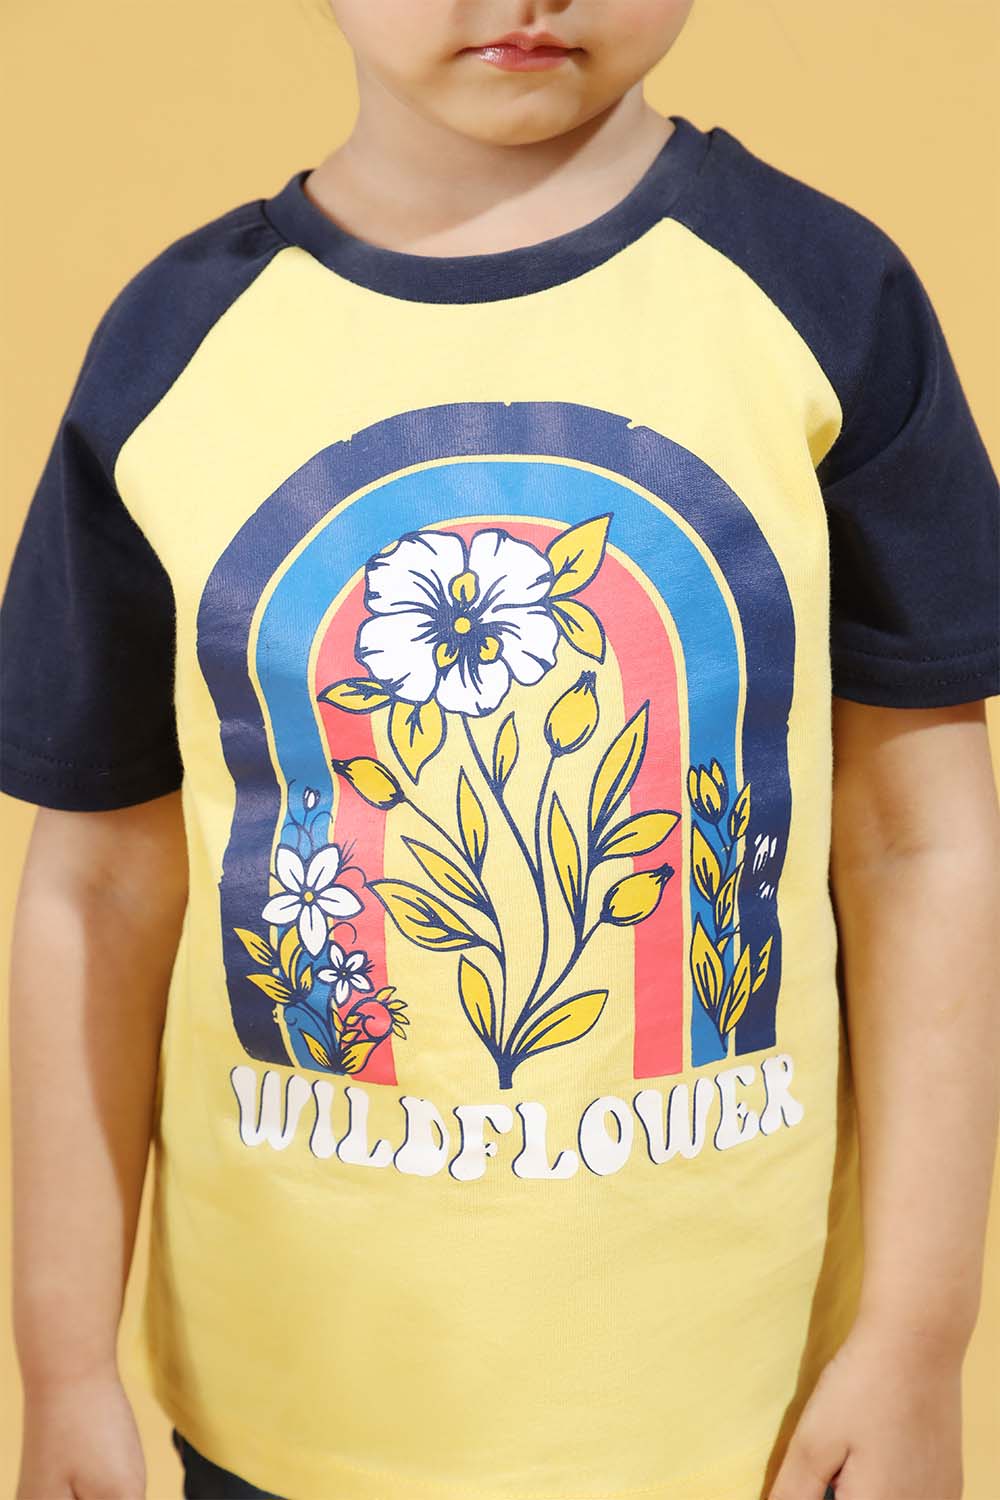 Hope Not Out by Shahid Afridi Girls Knit T-Shirt Wildflower Raglan Tee: Multi-Color Half Sleeve for Girls